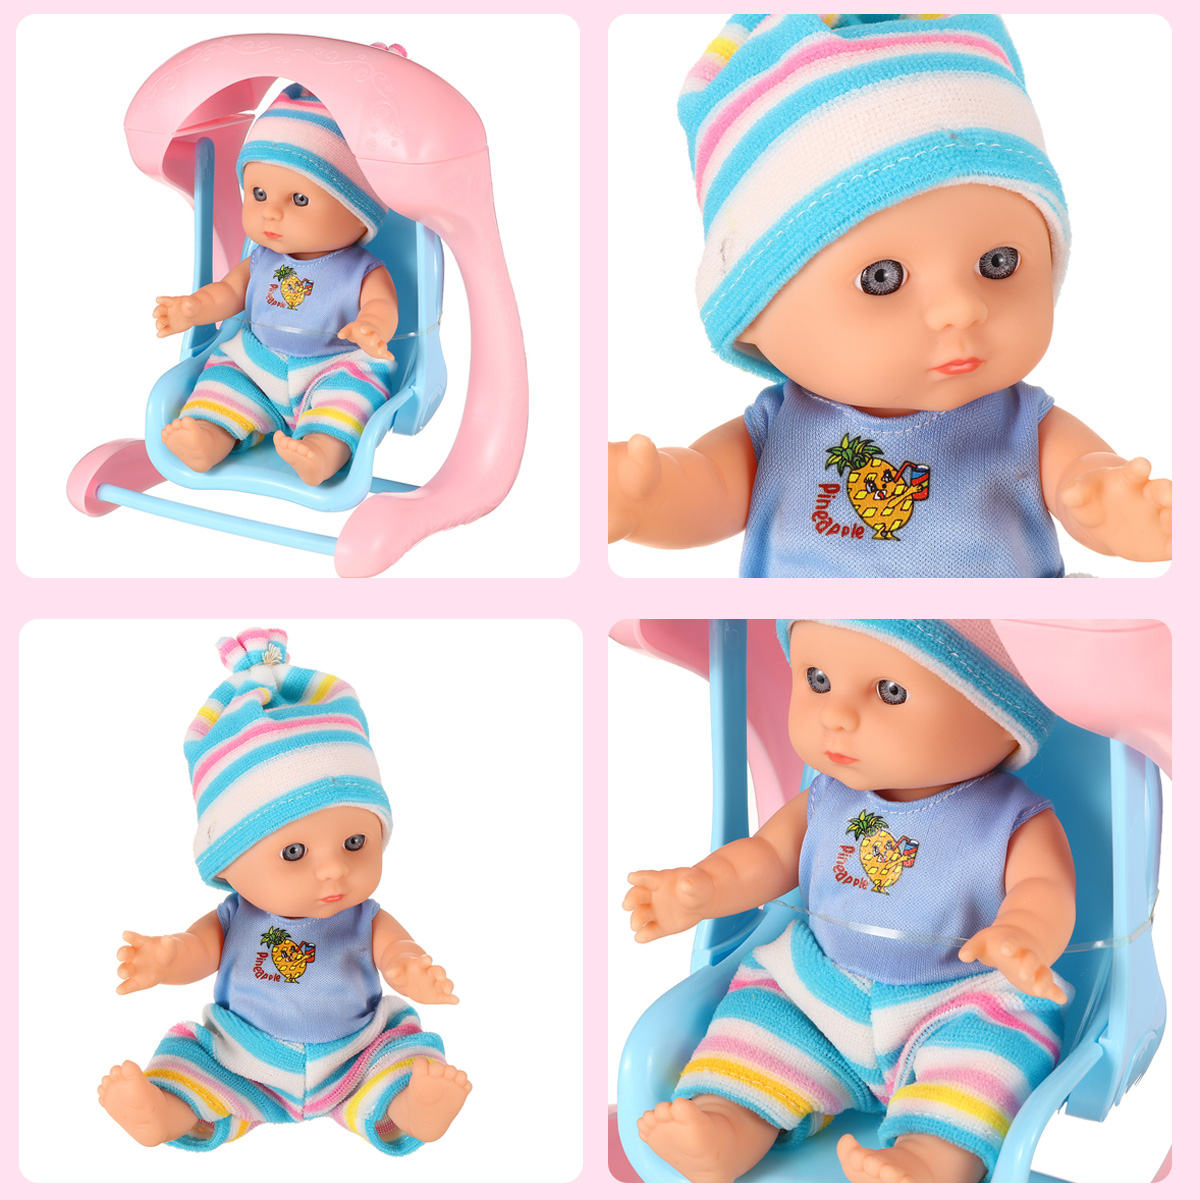 Simulation-Baby-3D-Creative-Cute-Doll-Play-House-Toy-Doll-Vinyl-Doll-Gift-1818655-3